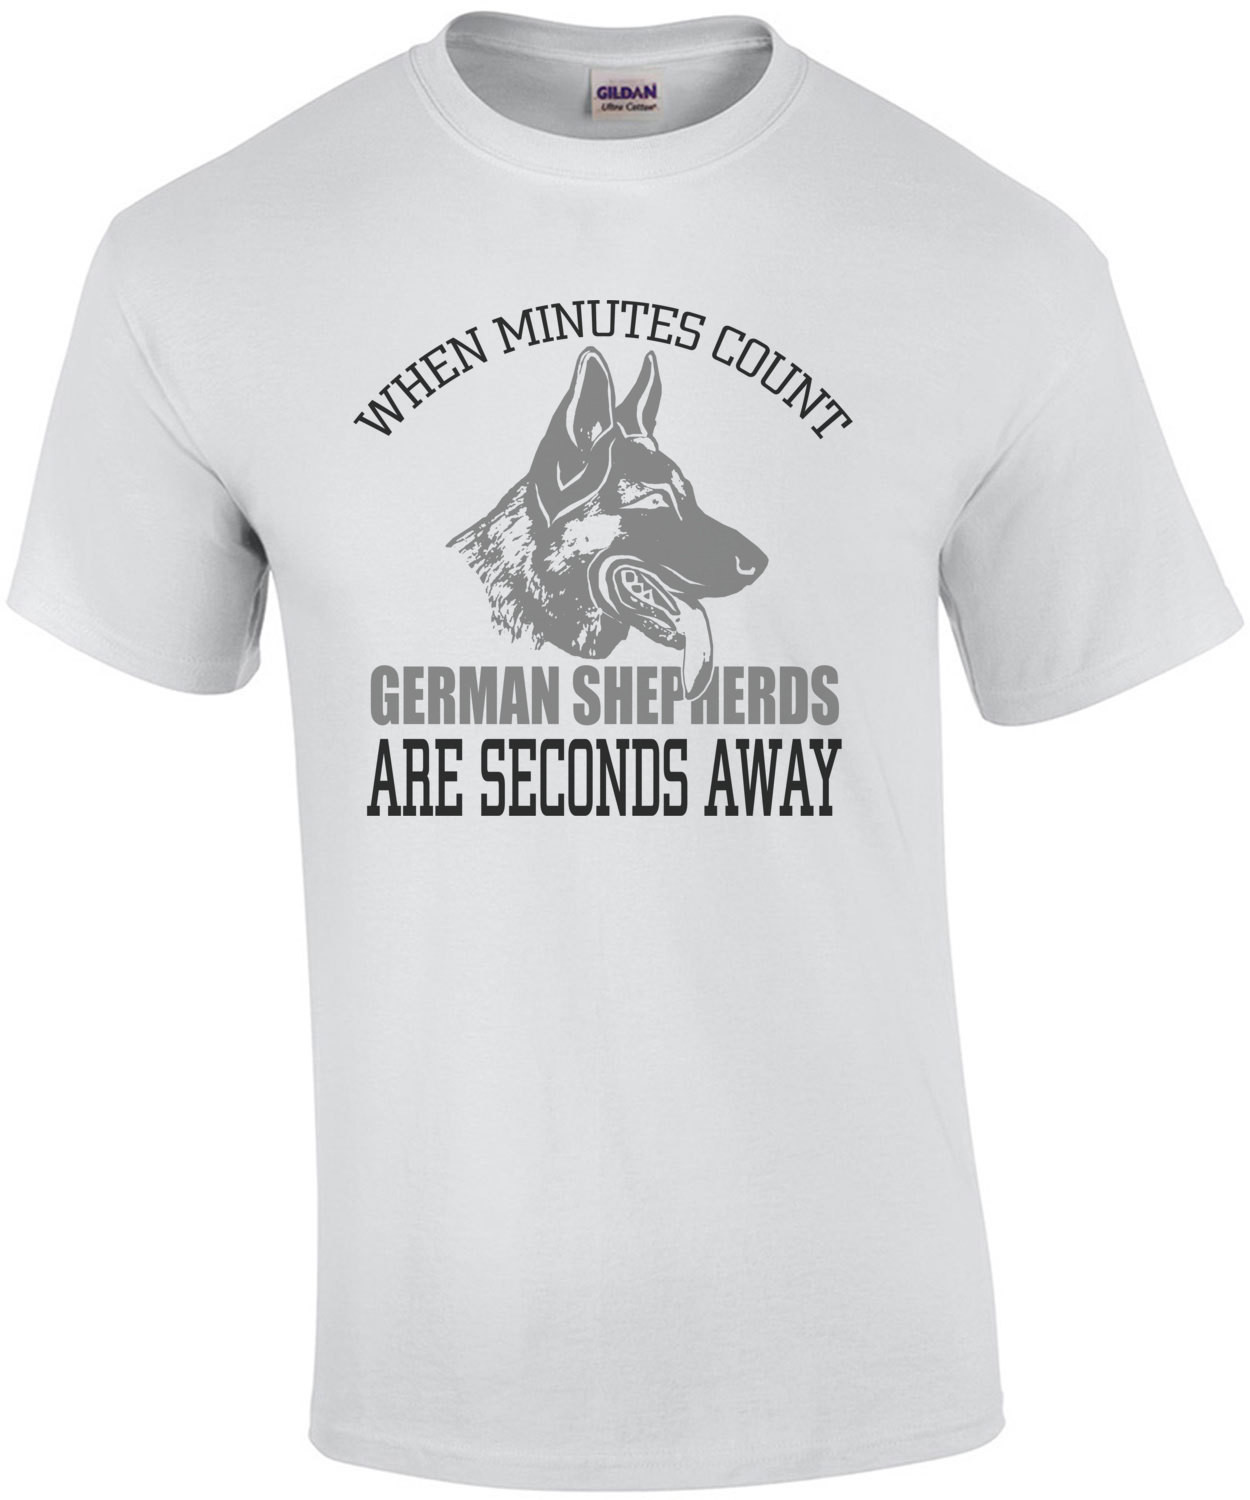 When Minutes Count German Shepherds Are Seconds Away T-Shirt